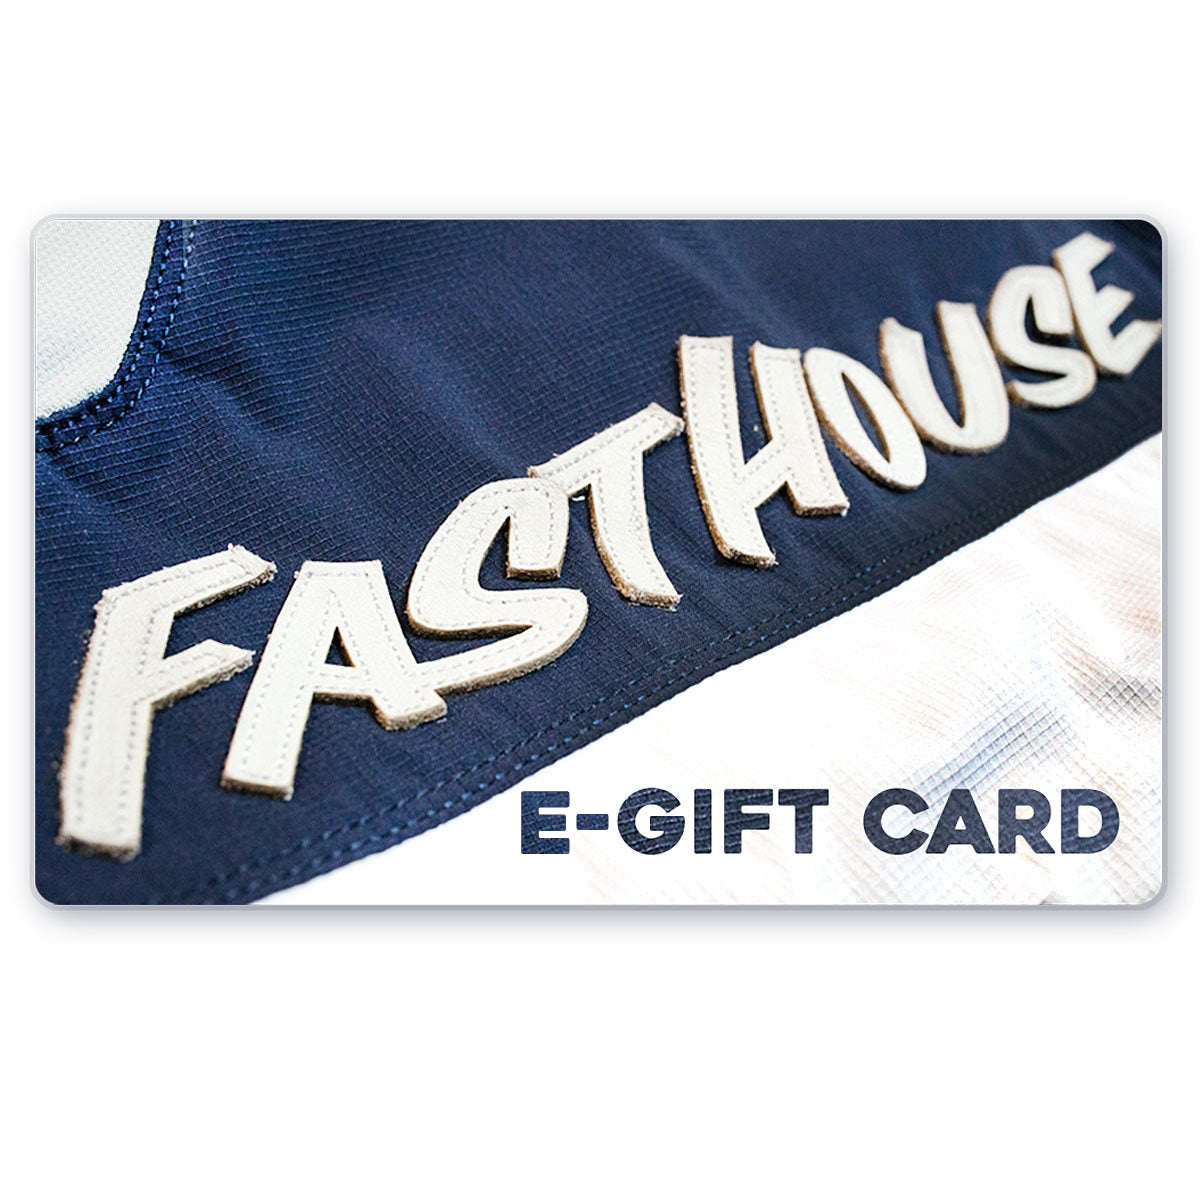 Fasthouse E-Gift Card